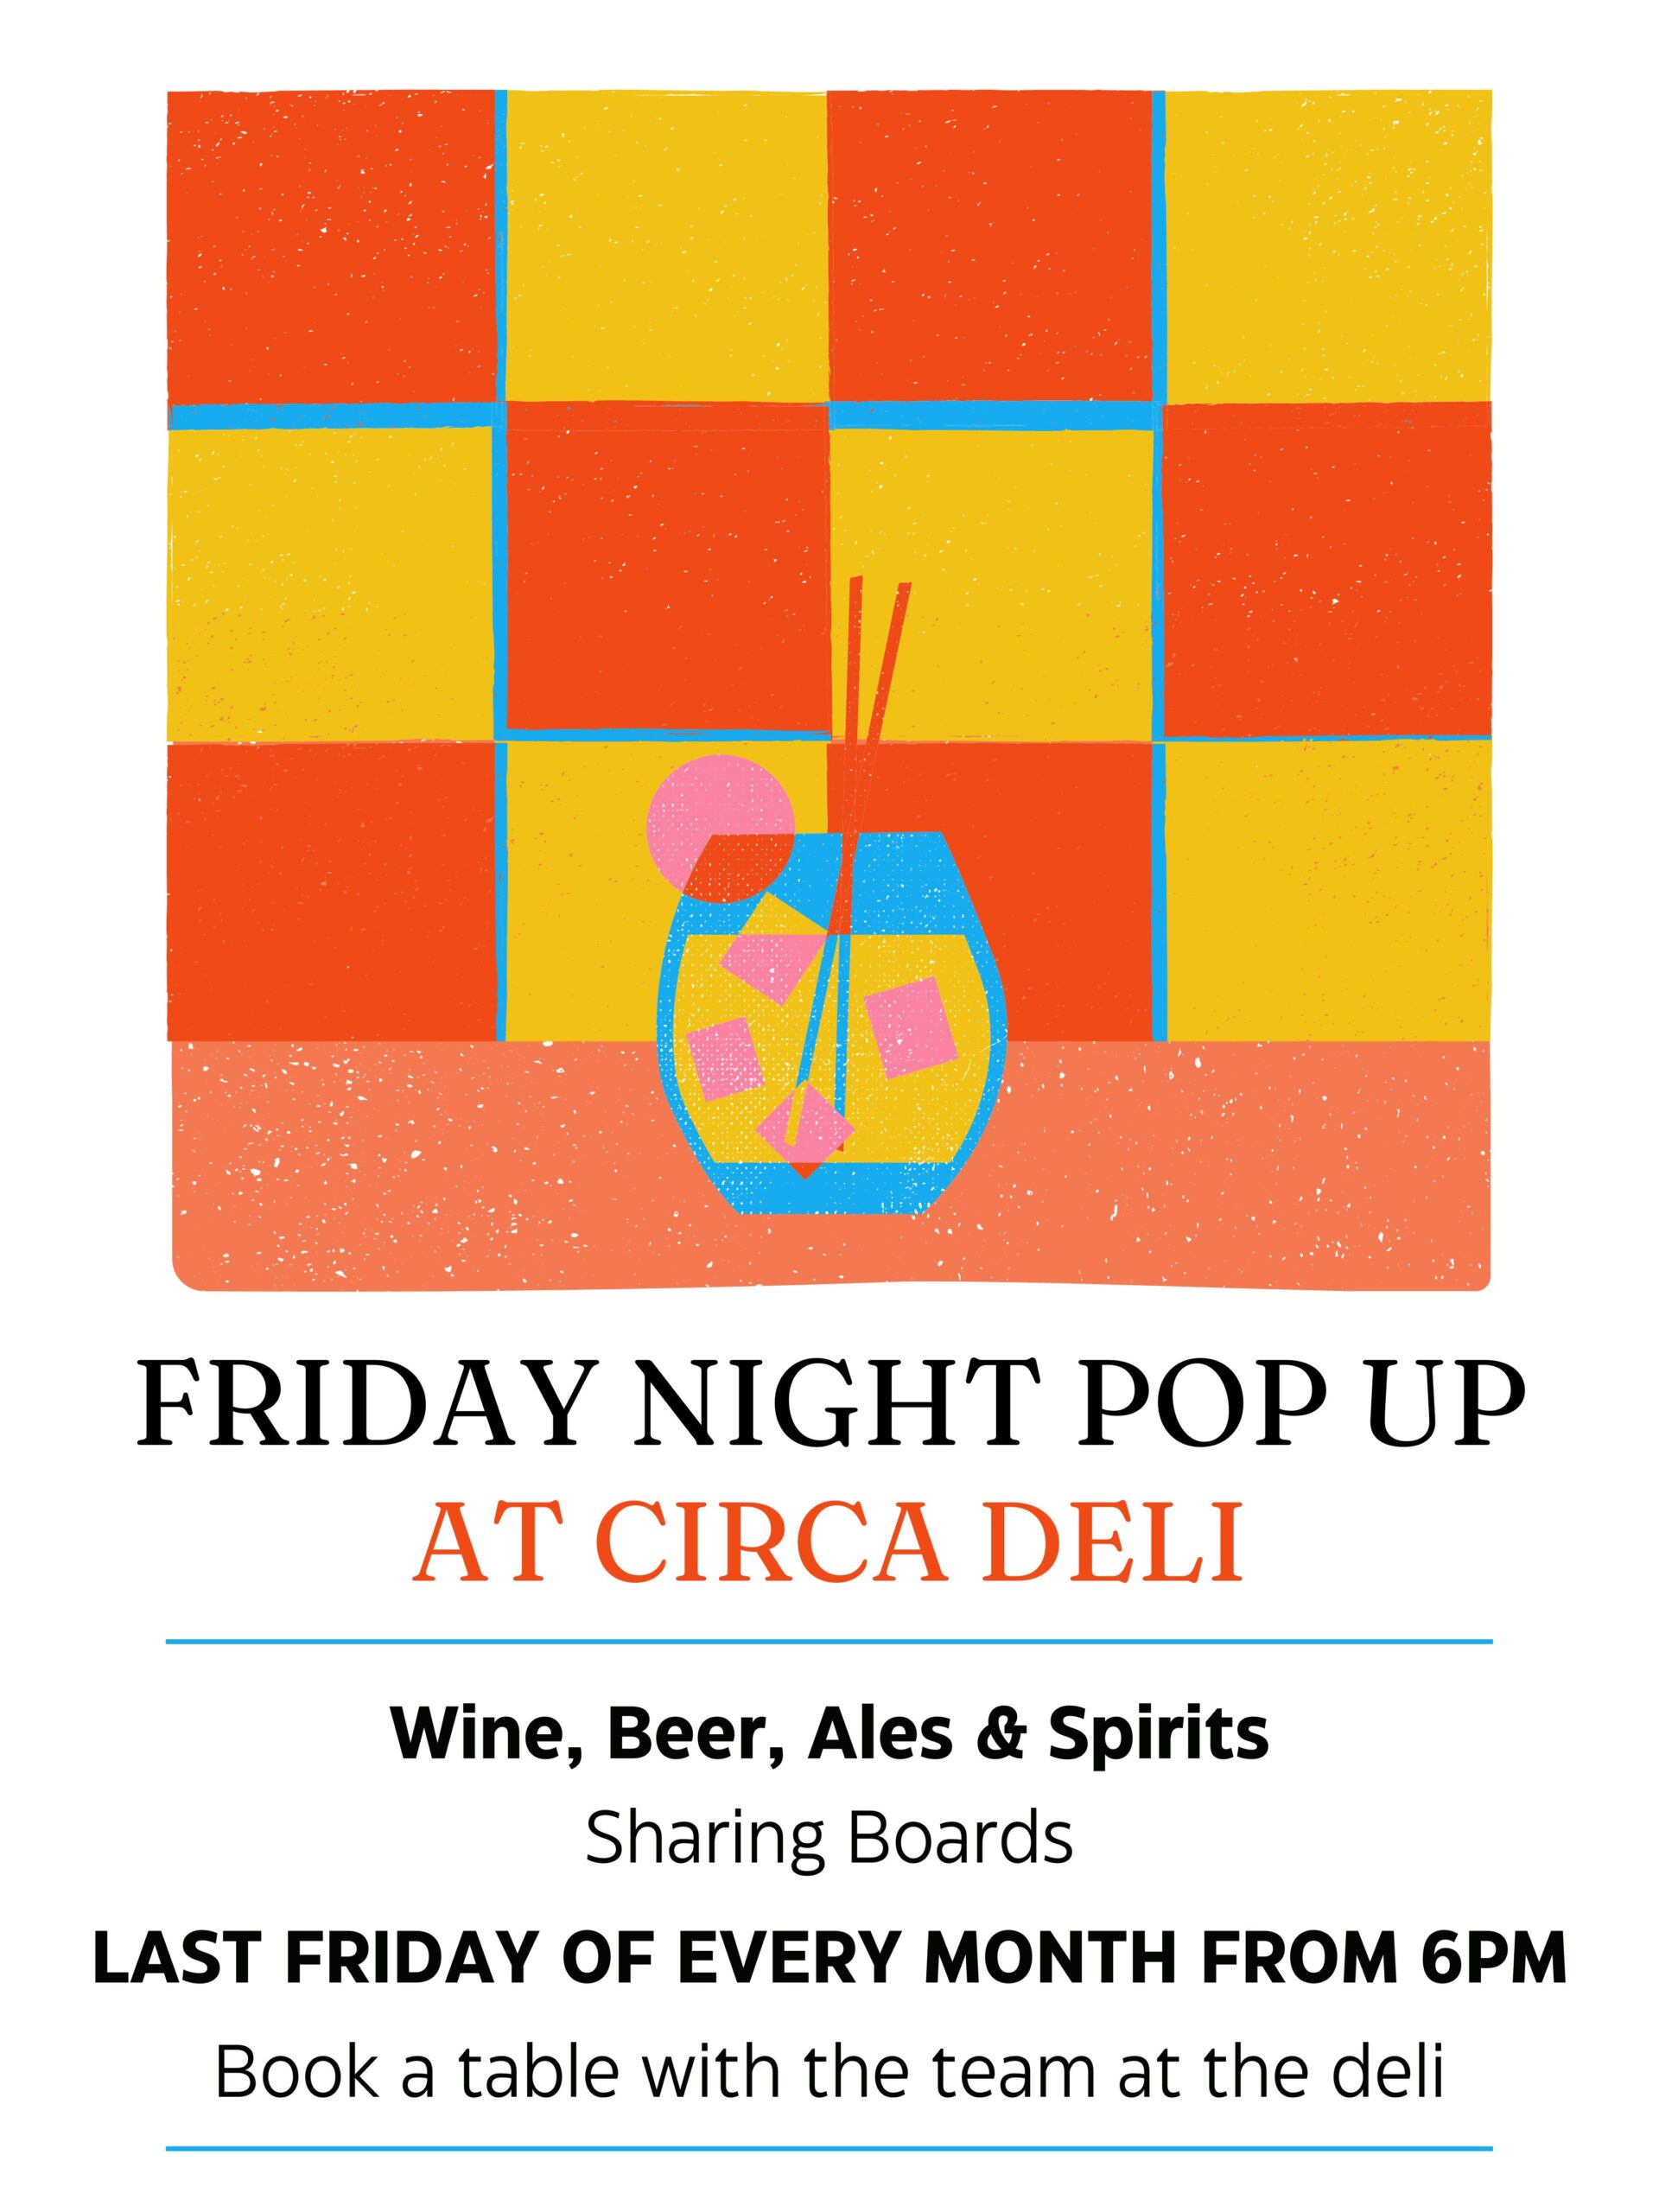 Circa deli pop up event friday night last friday of the month poster